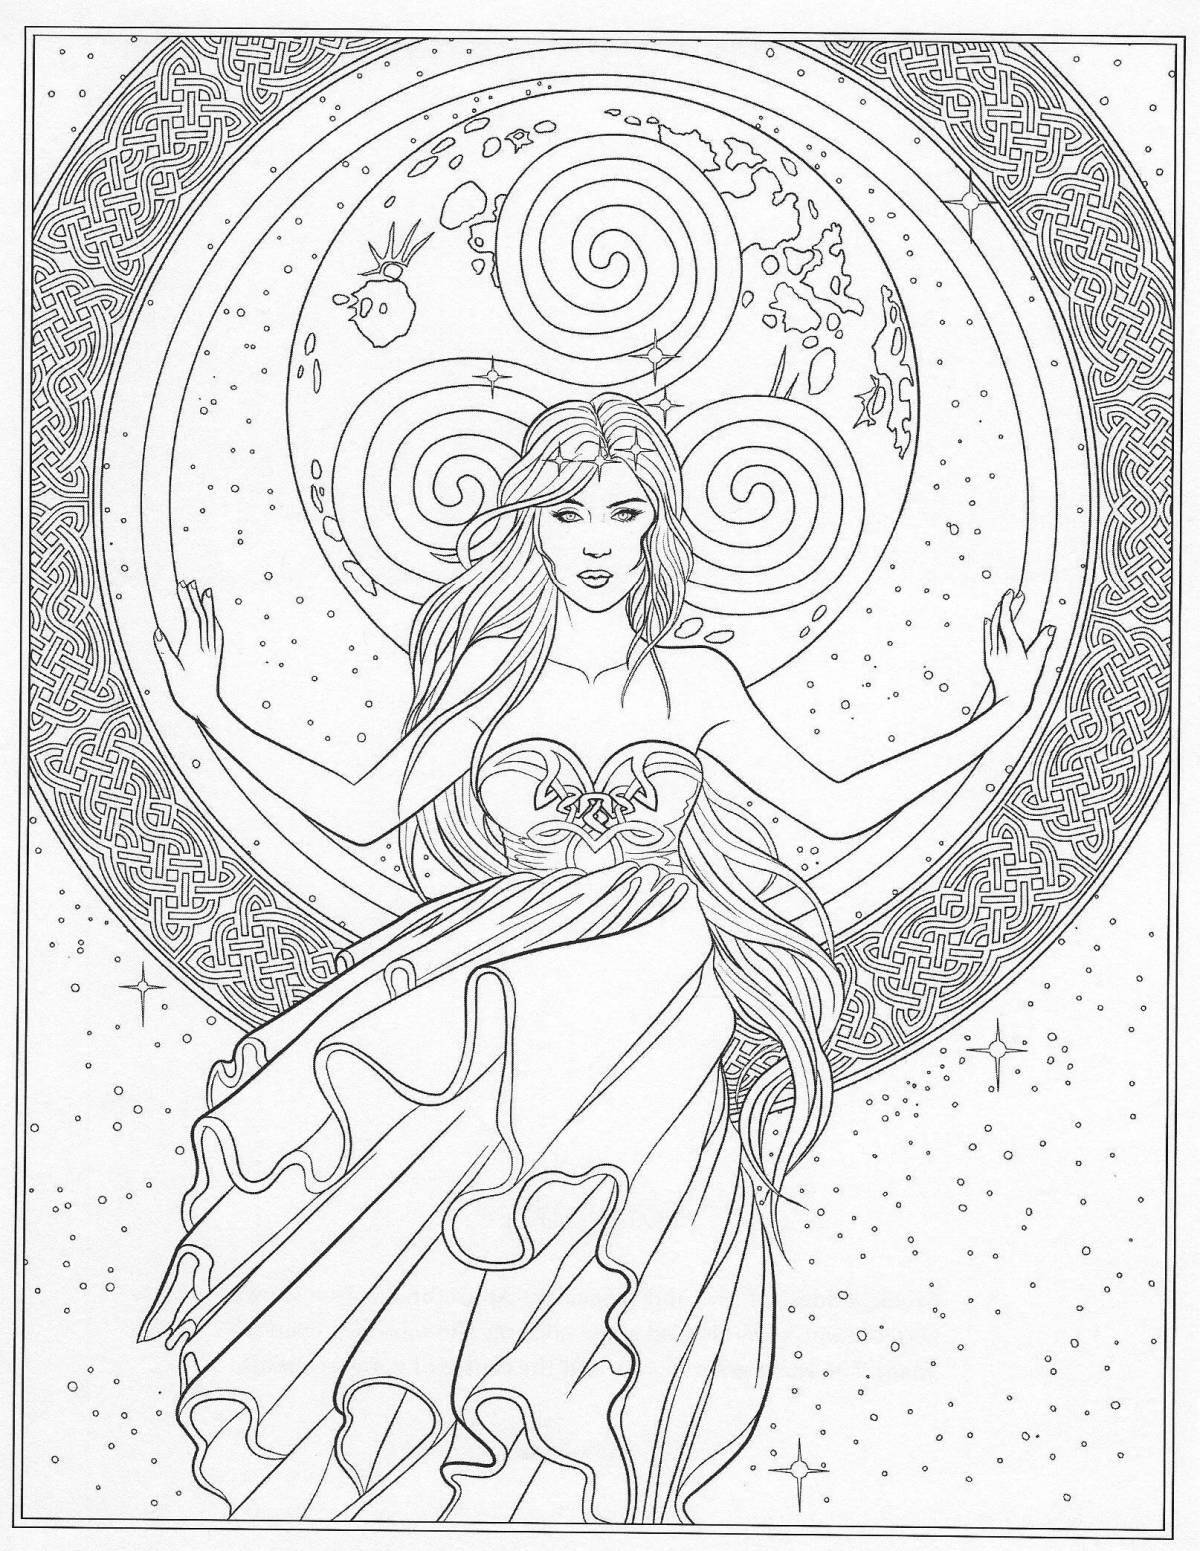 Incredible coloring page magic page